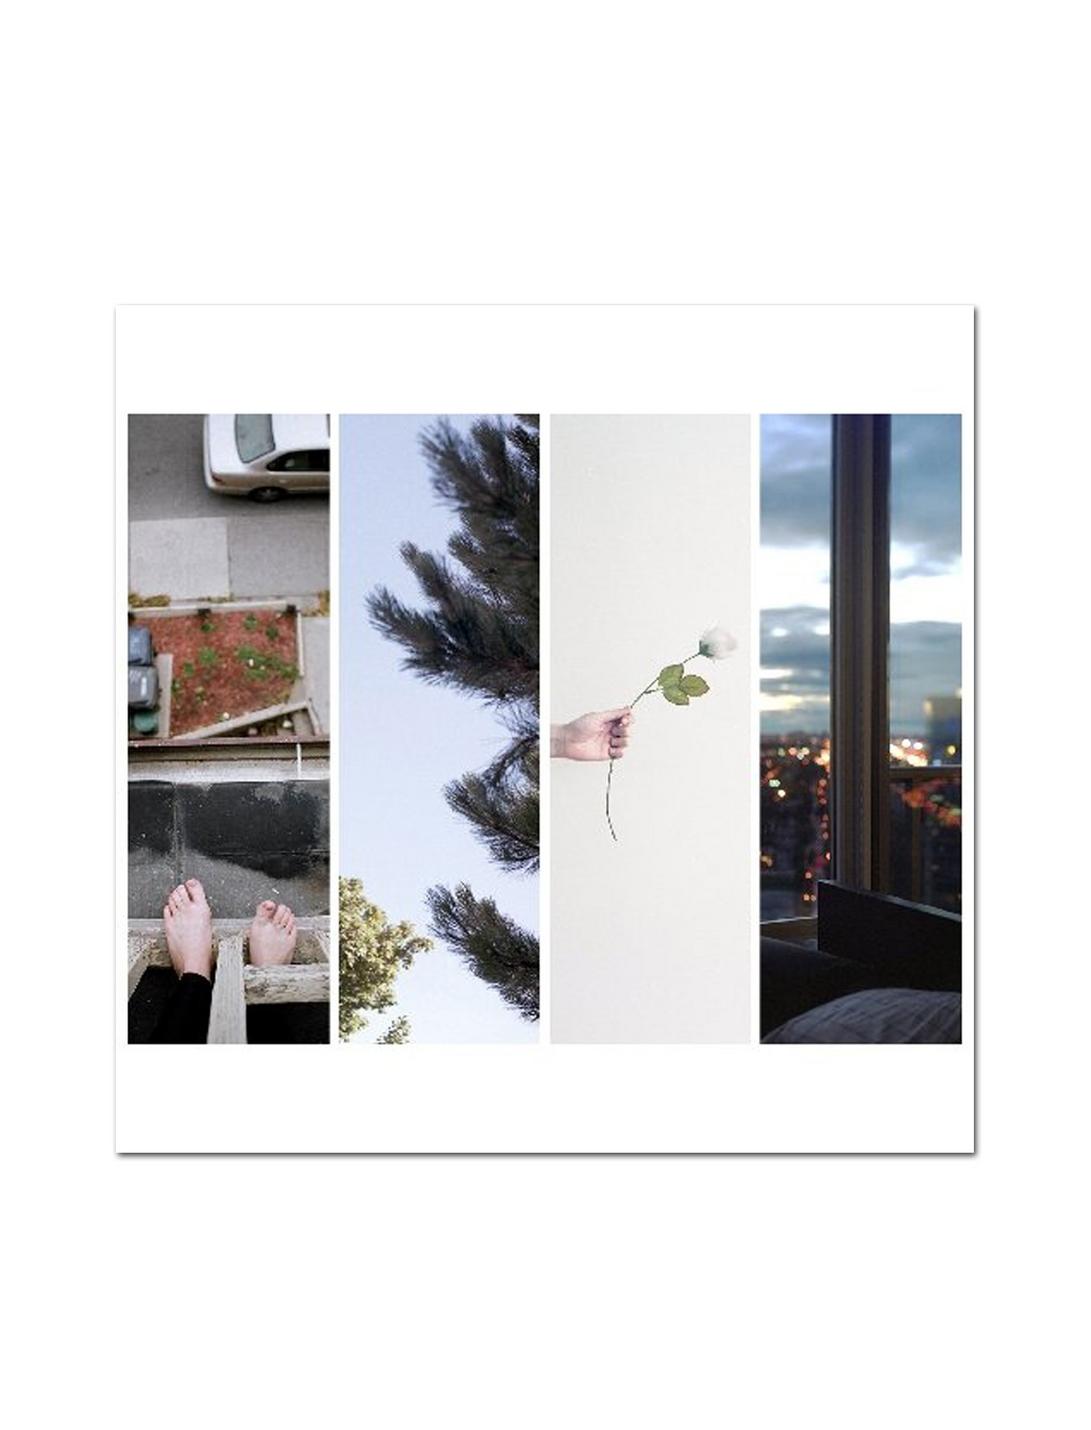 Counterparts - The Difference Between Hell And Home Vinyl LP Hot Topic Exclusive, , hi-res